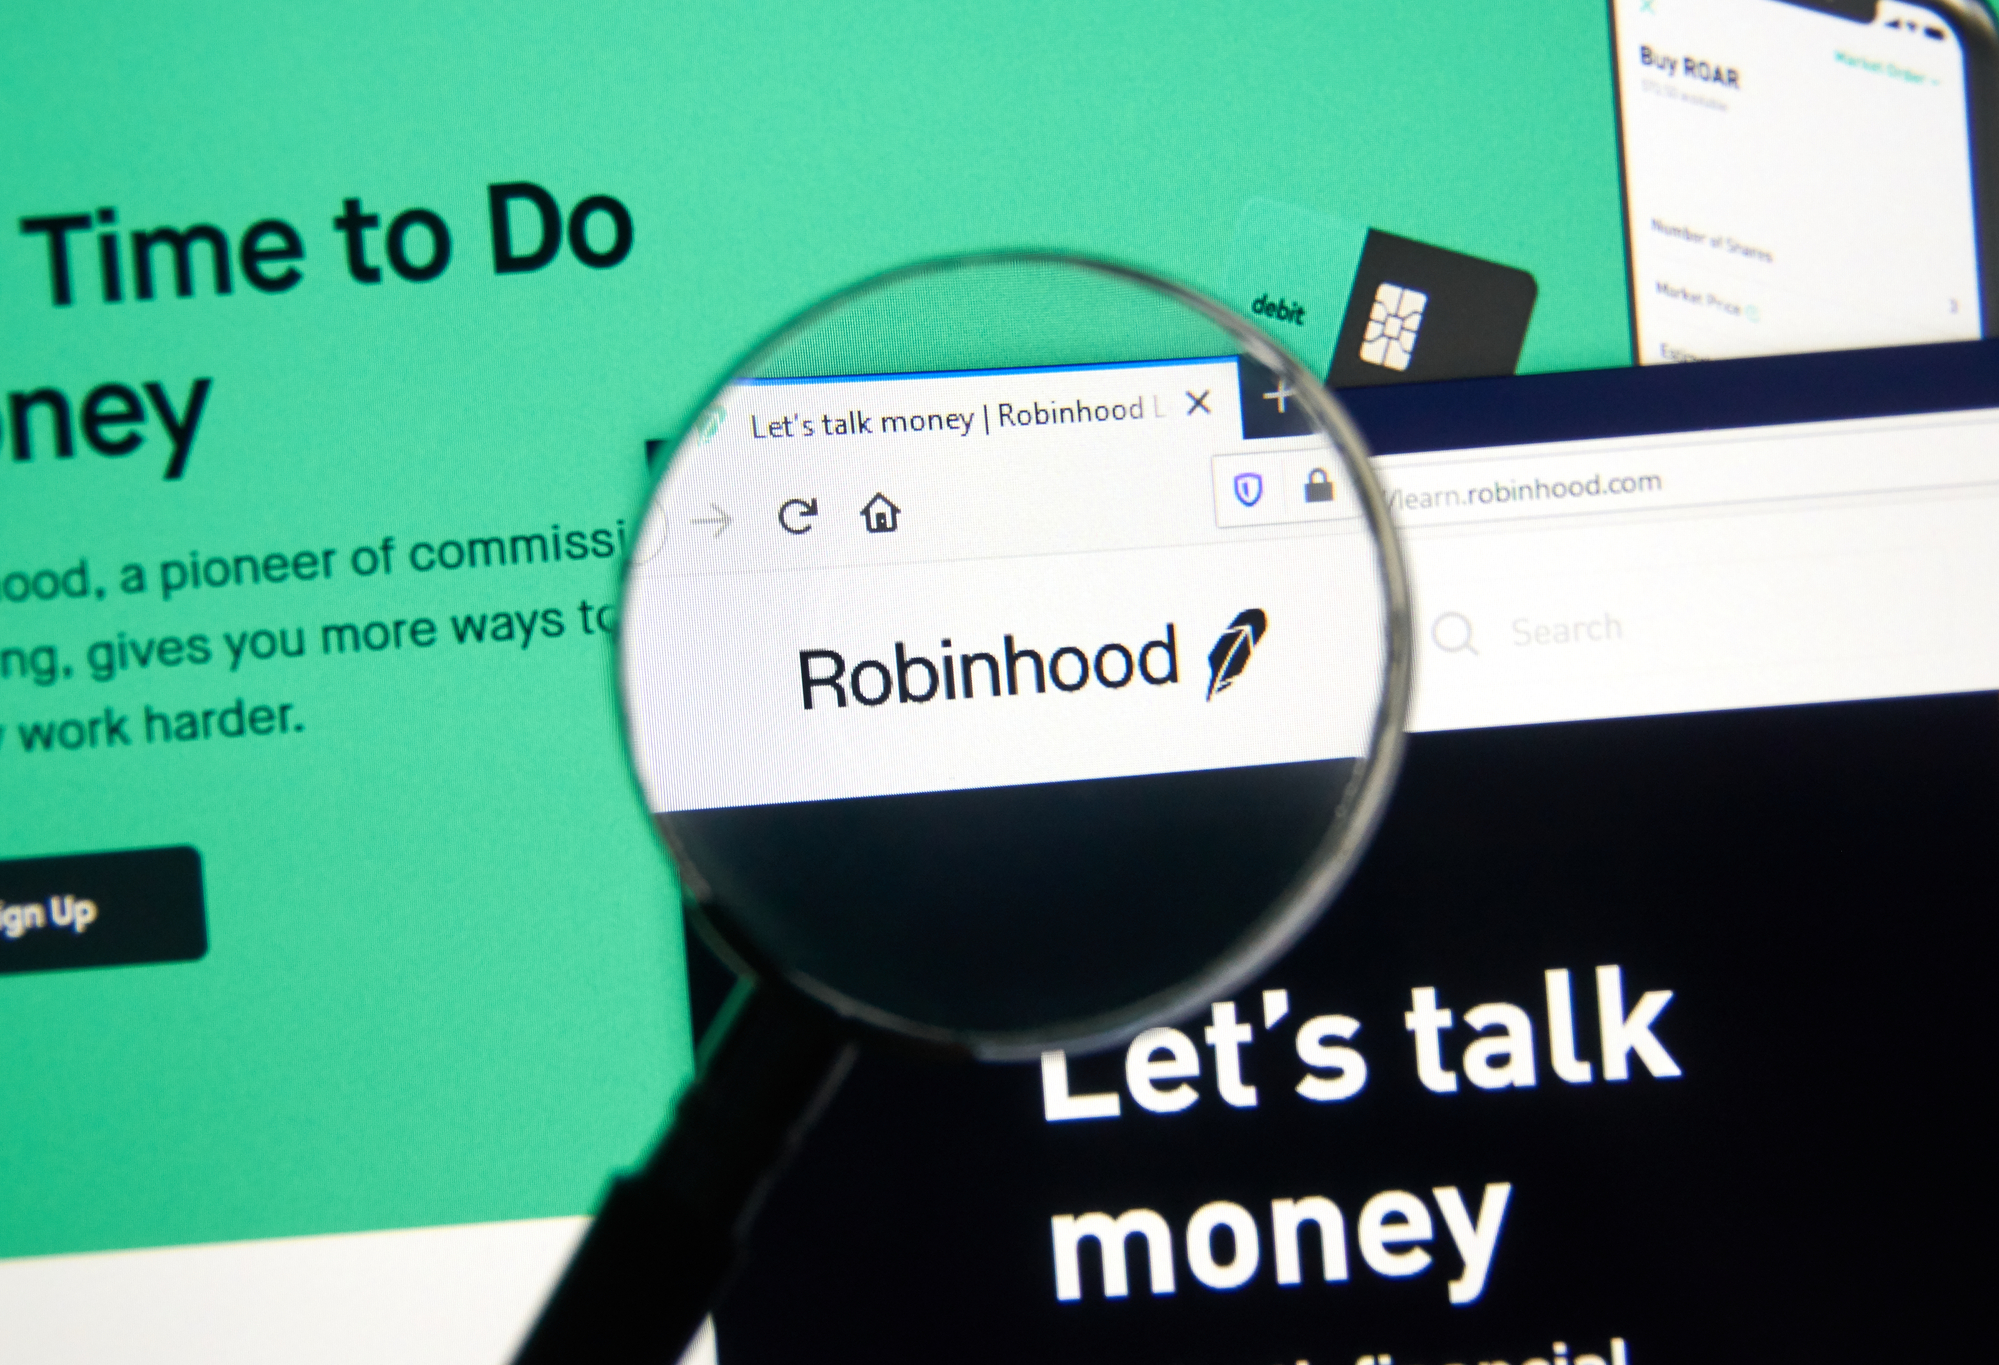 Robinhood - Investment & Trading, Commission-free Download Android APK | Aptoide